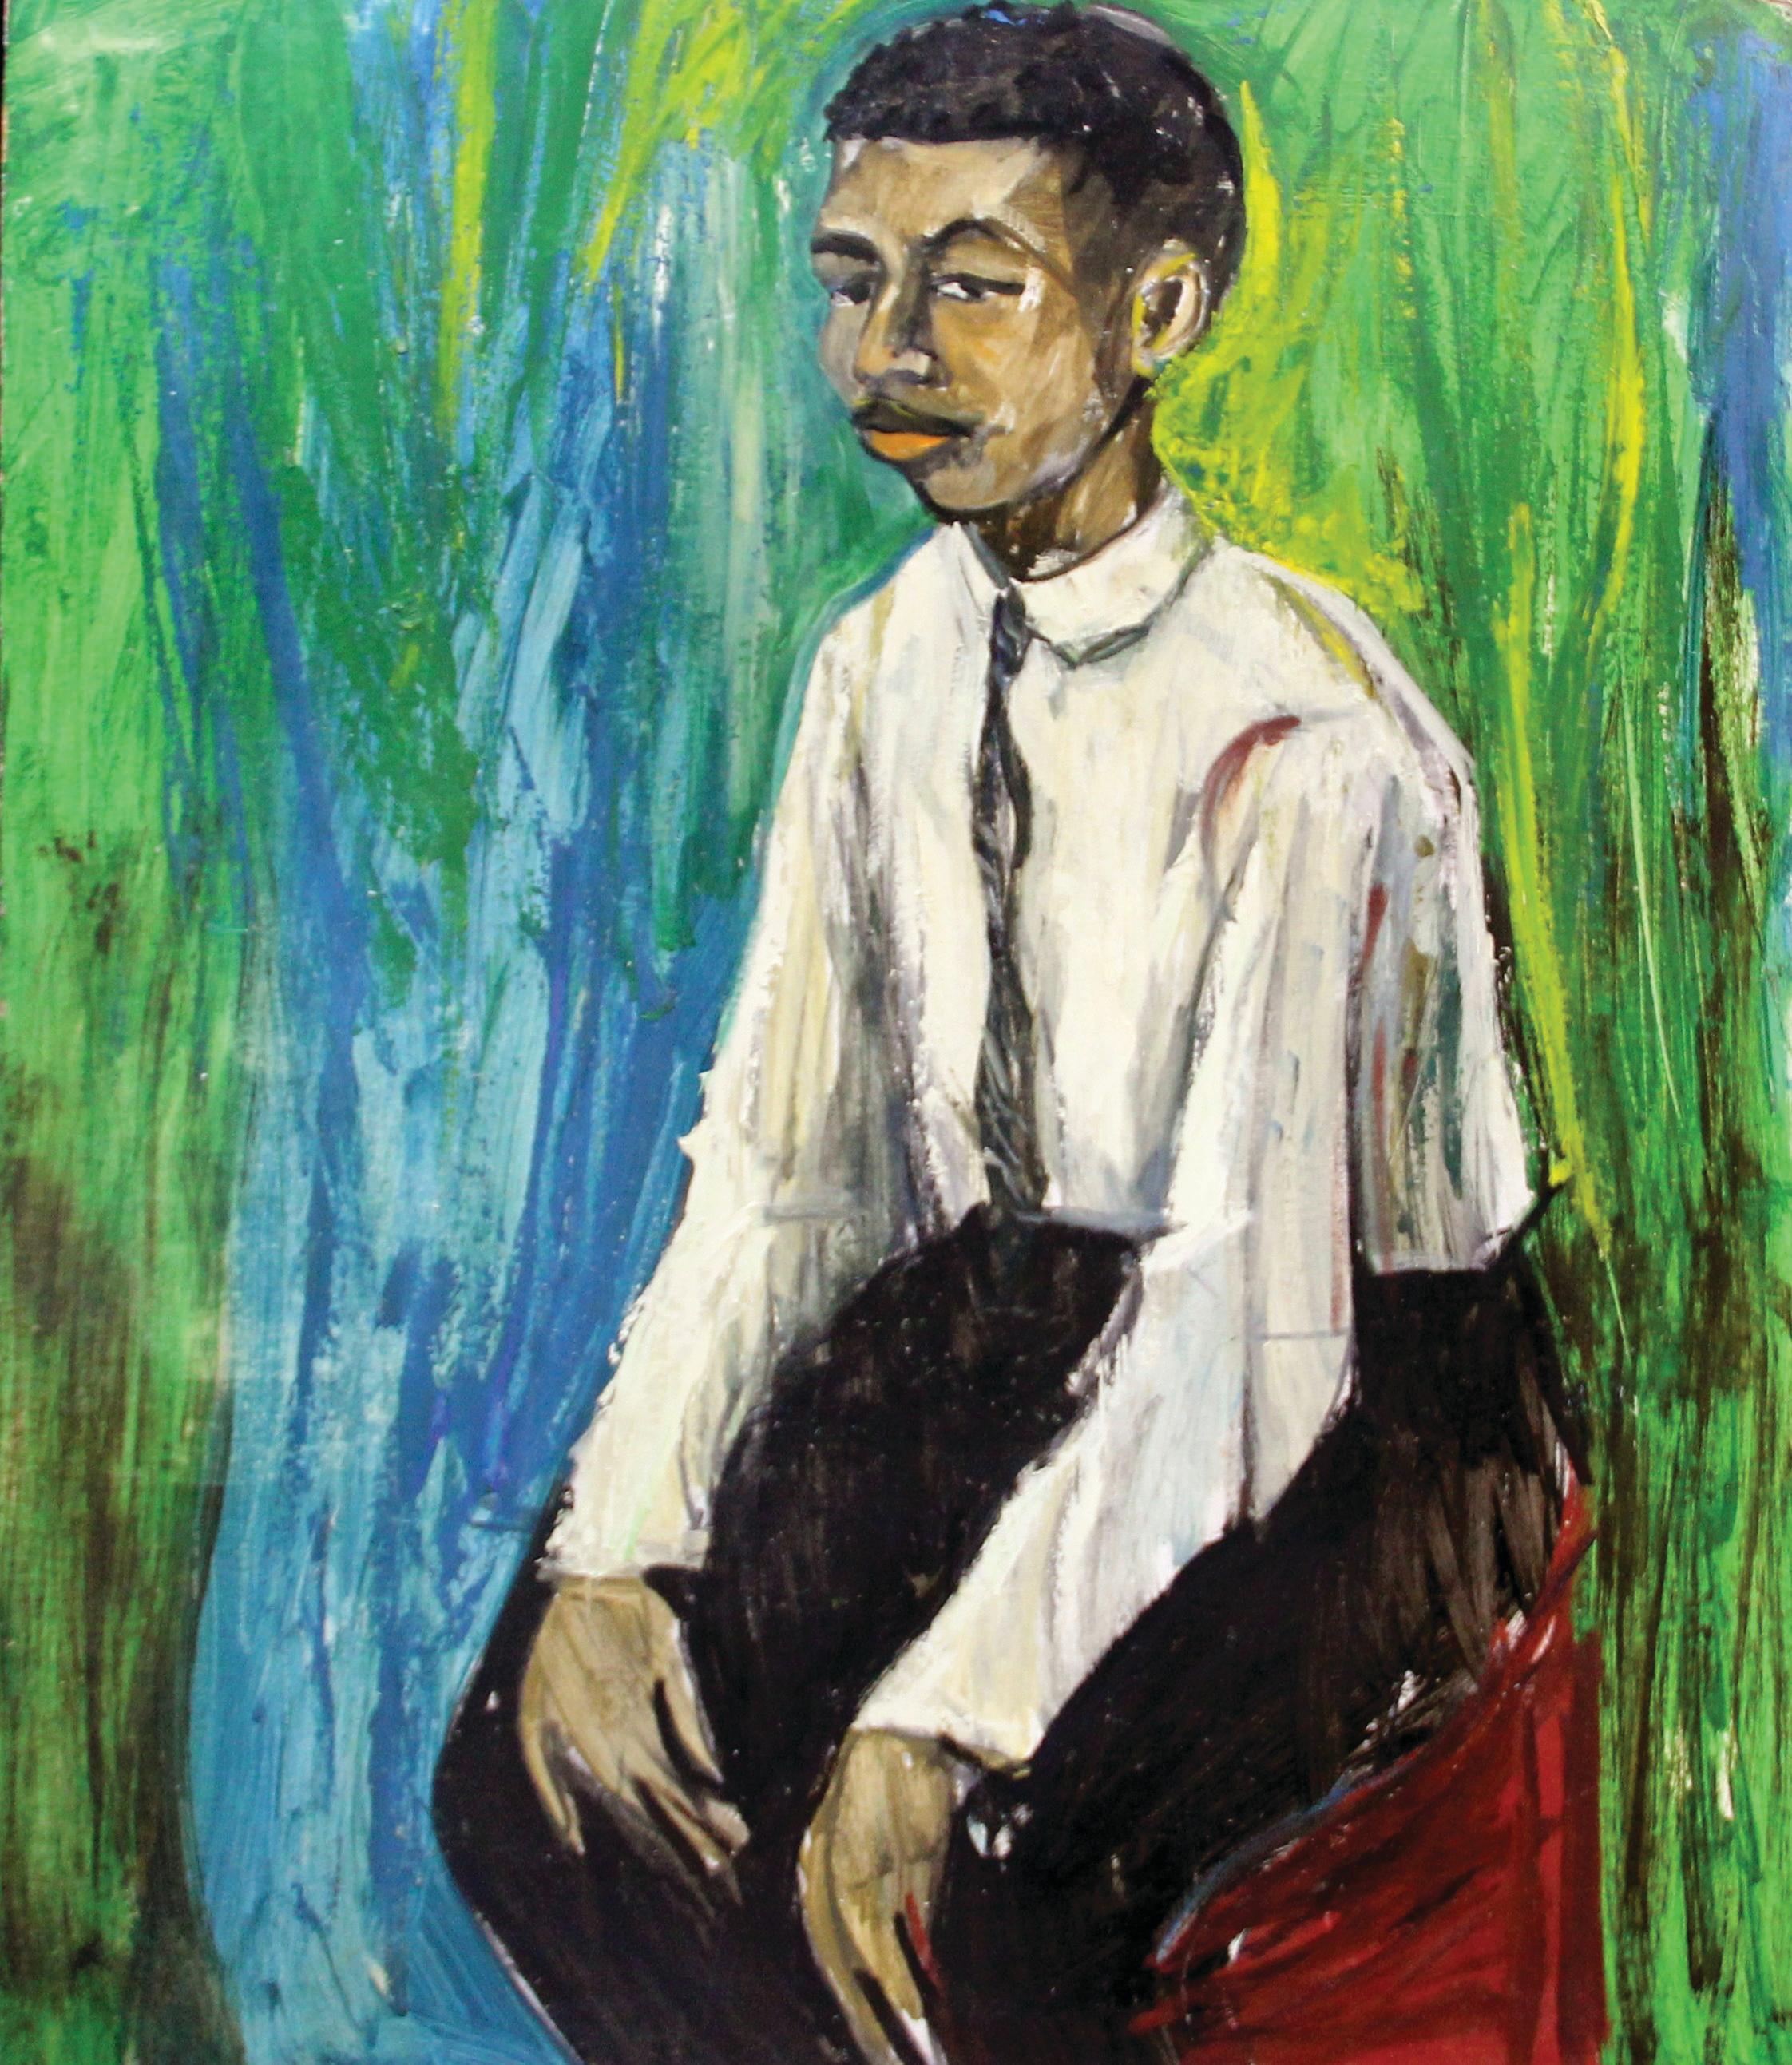 Boy Waiting, Color Portrait of a Young Man, Black Artist, Double Sided 